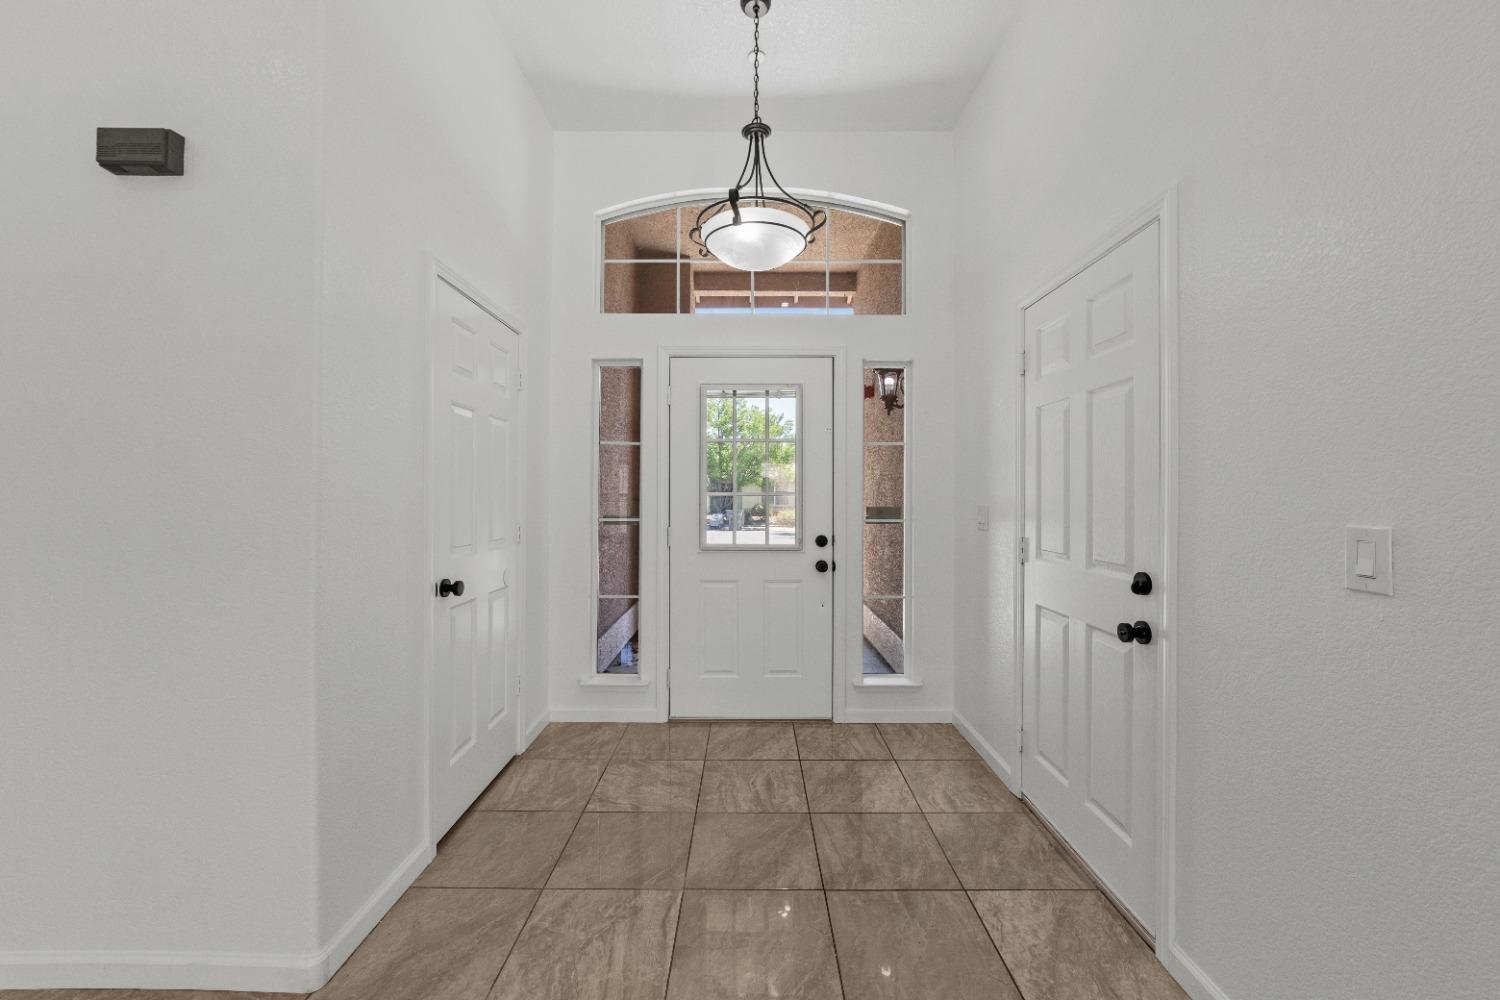 a view of an entryway with wooden floor